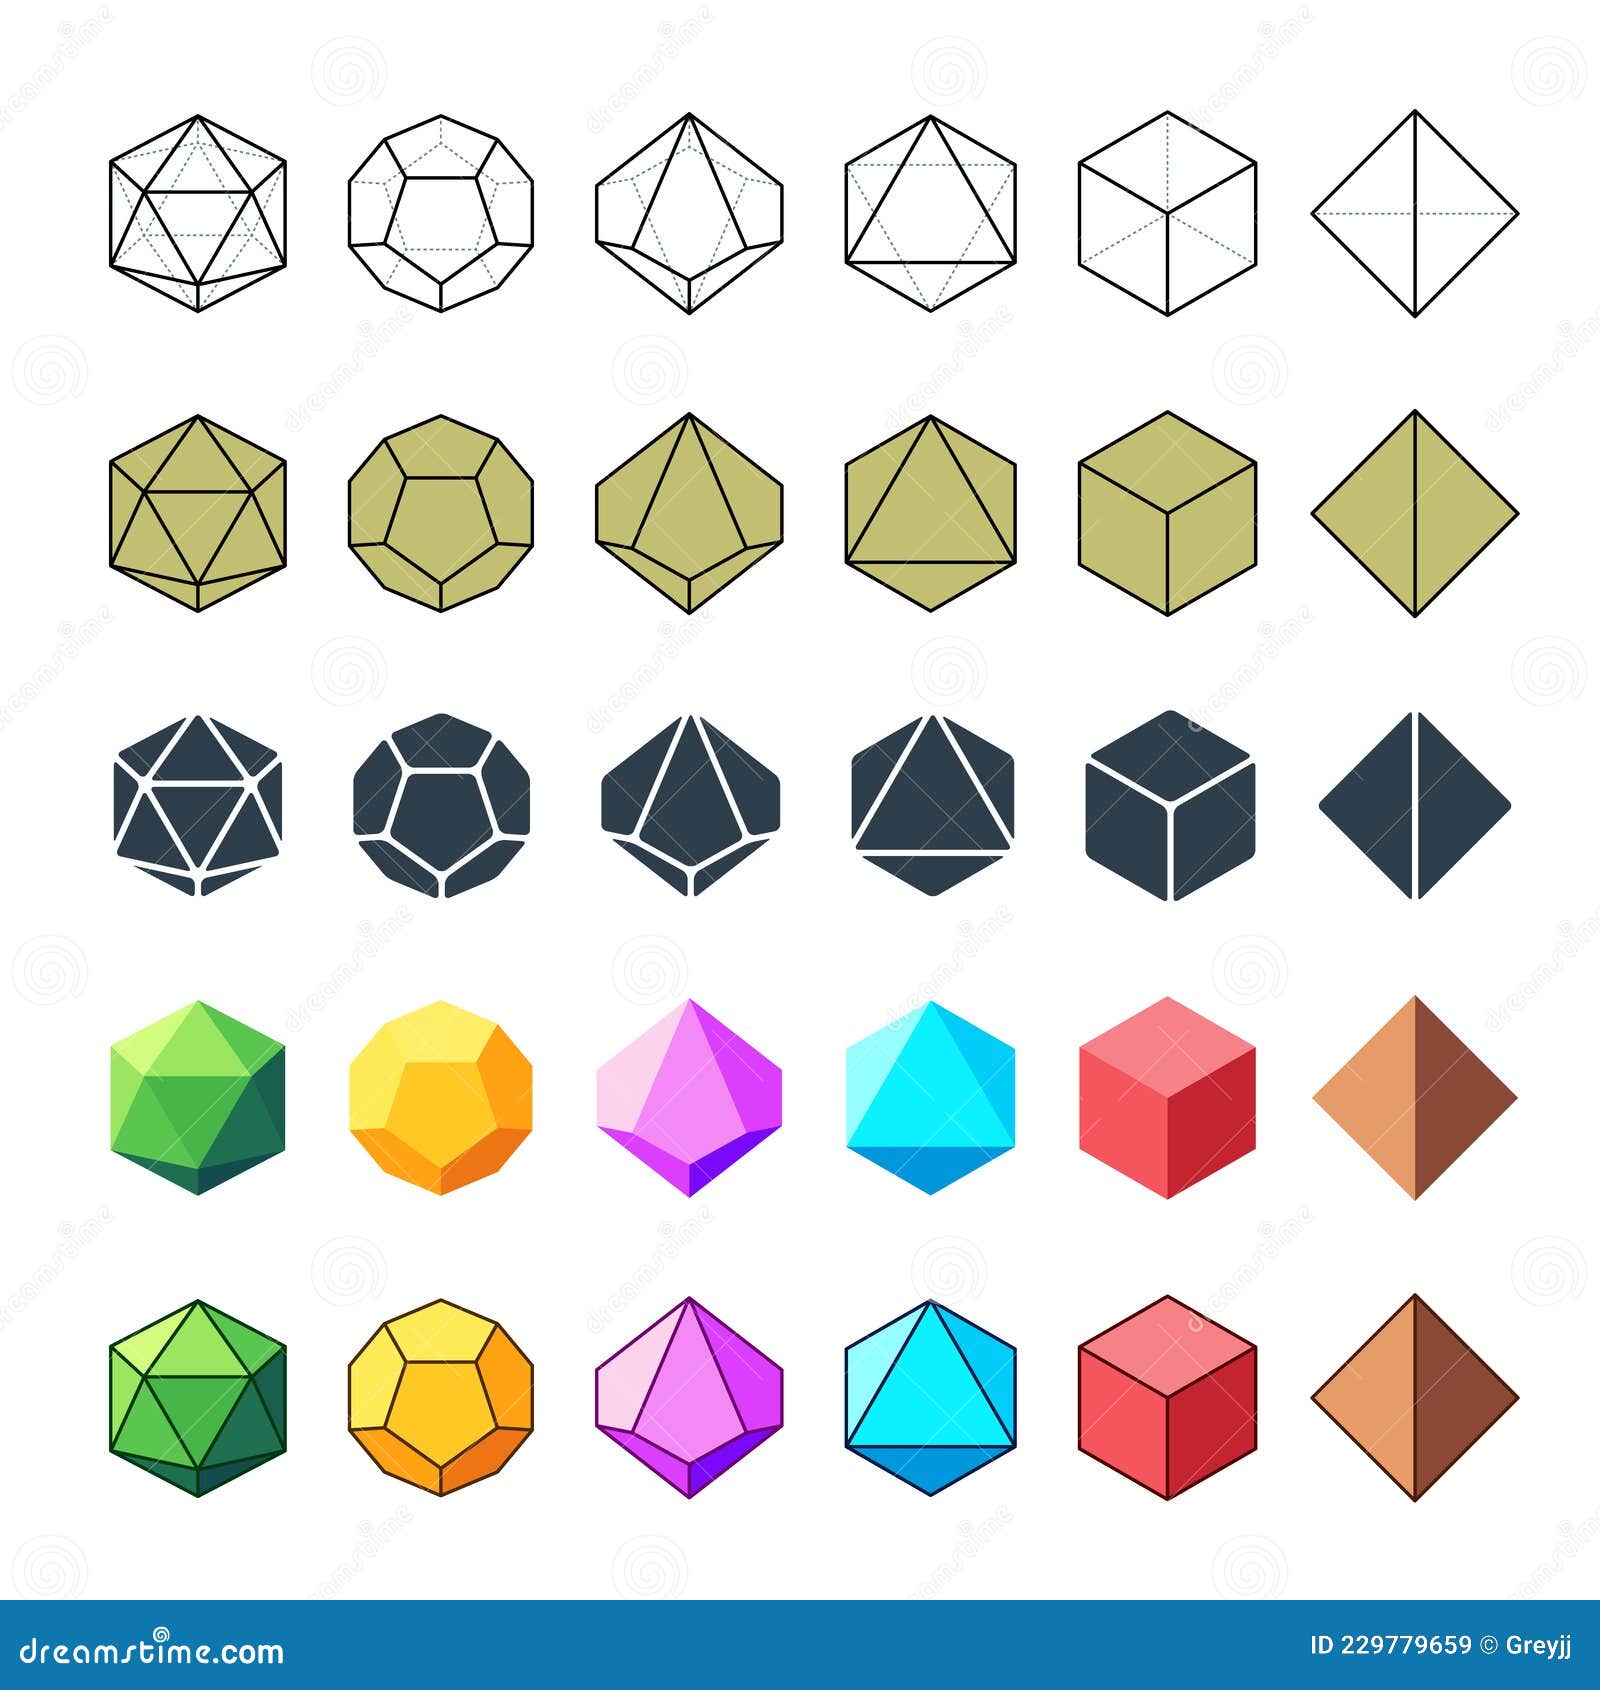 isometric d4, d6, d8, d10, d12, and d20 dice icons for board games